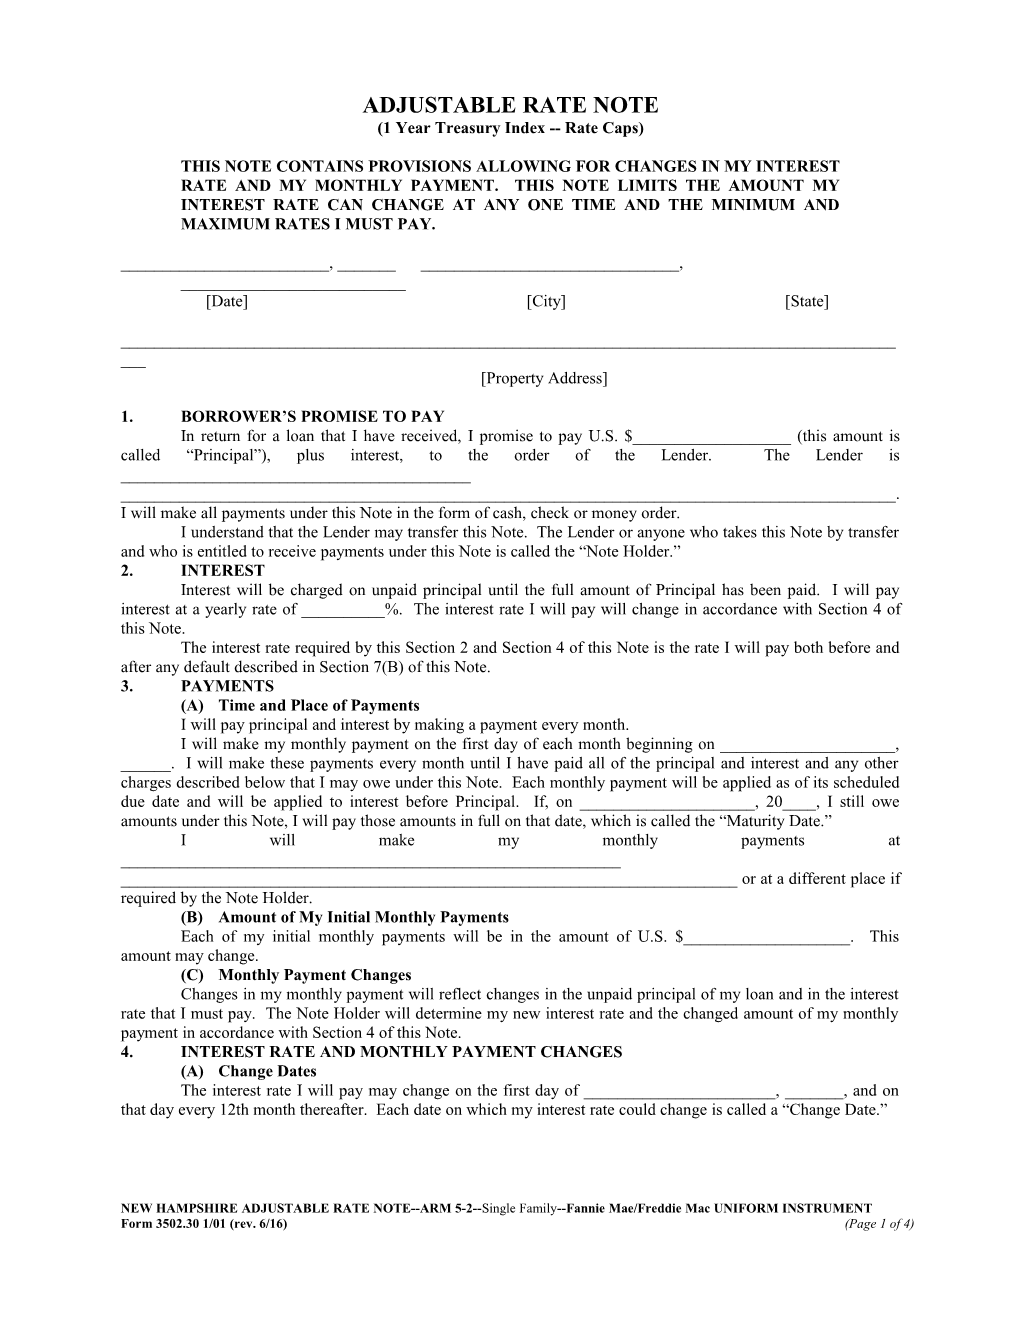 New Hampshire Adjustable Rate Note - ARM 5-2 (Form 3502.30): Word